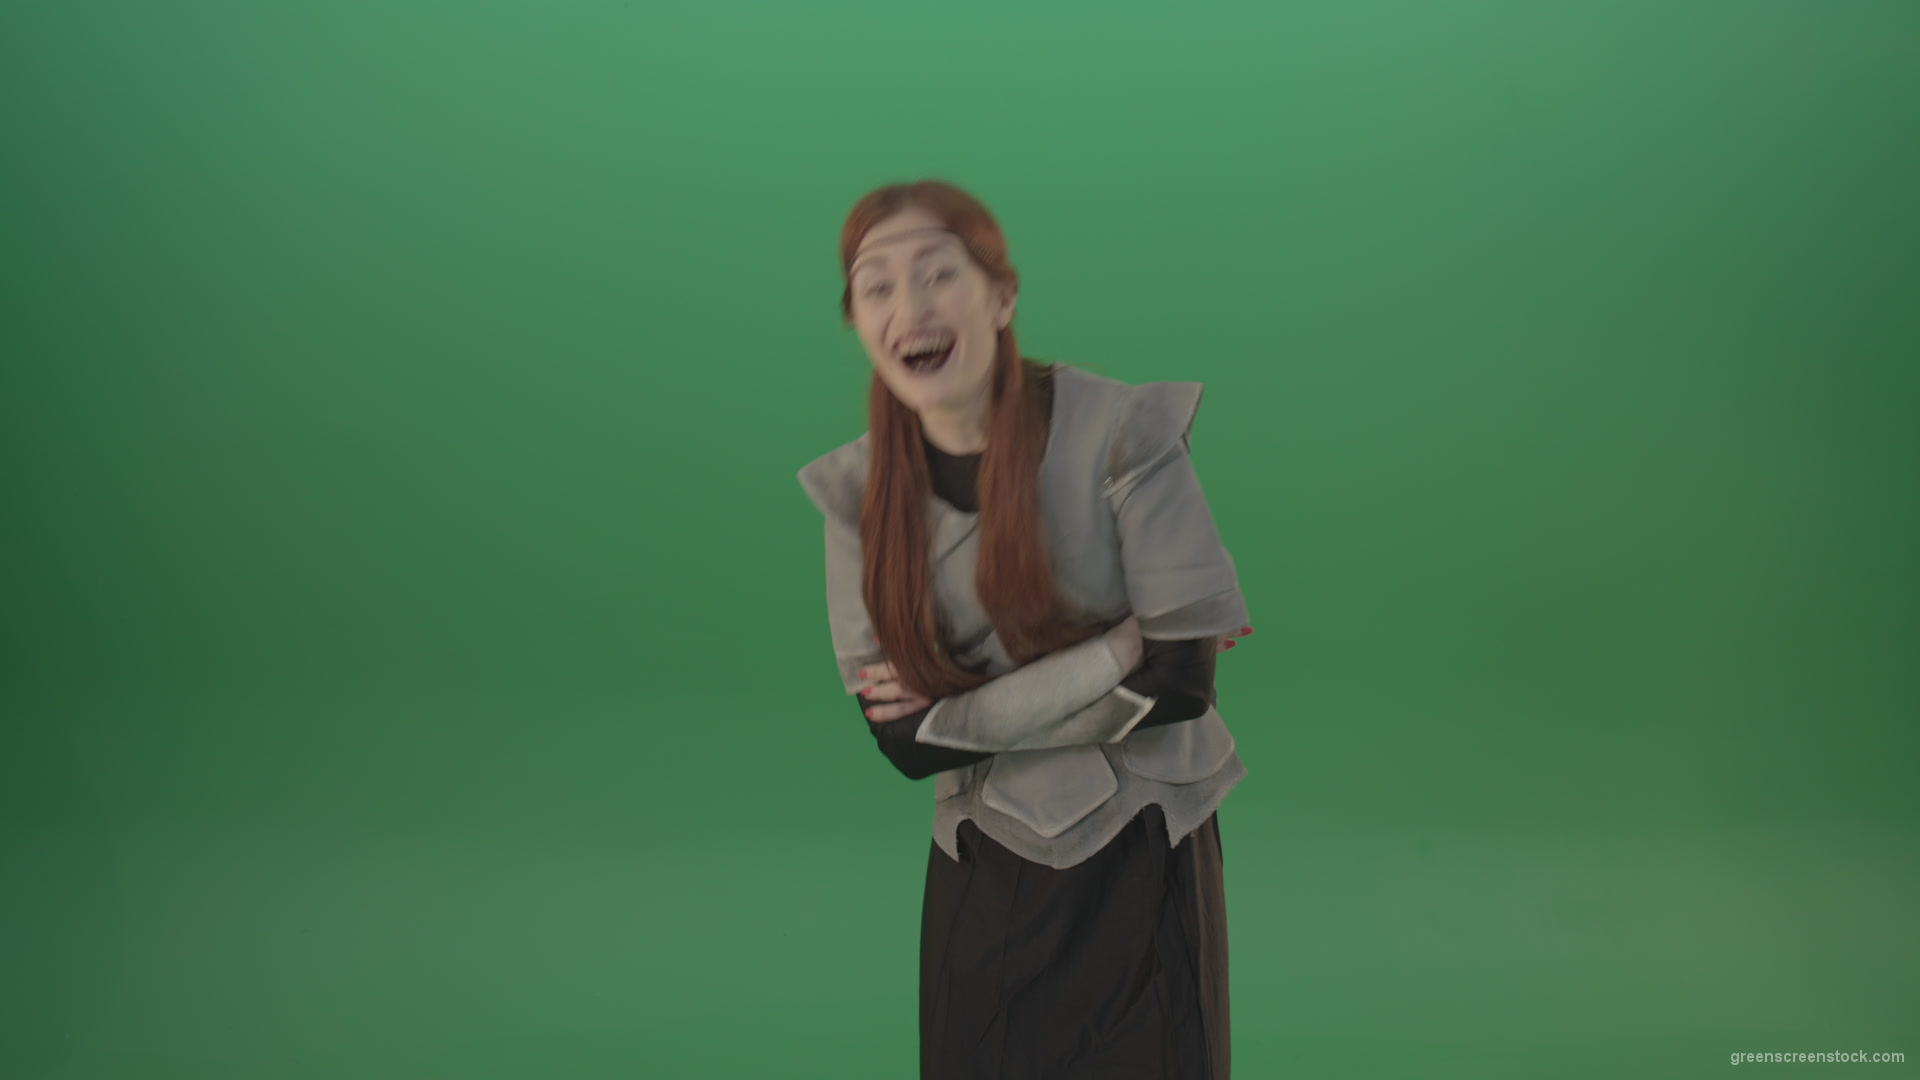 Girl-in-a-medieval-wig-costume-laughs-on-a-green-background-1_006 Green Screen Stock